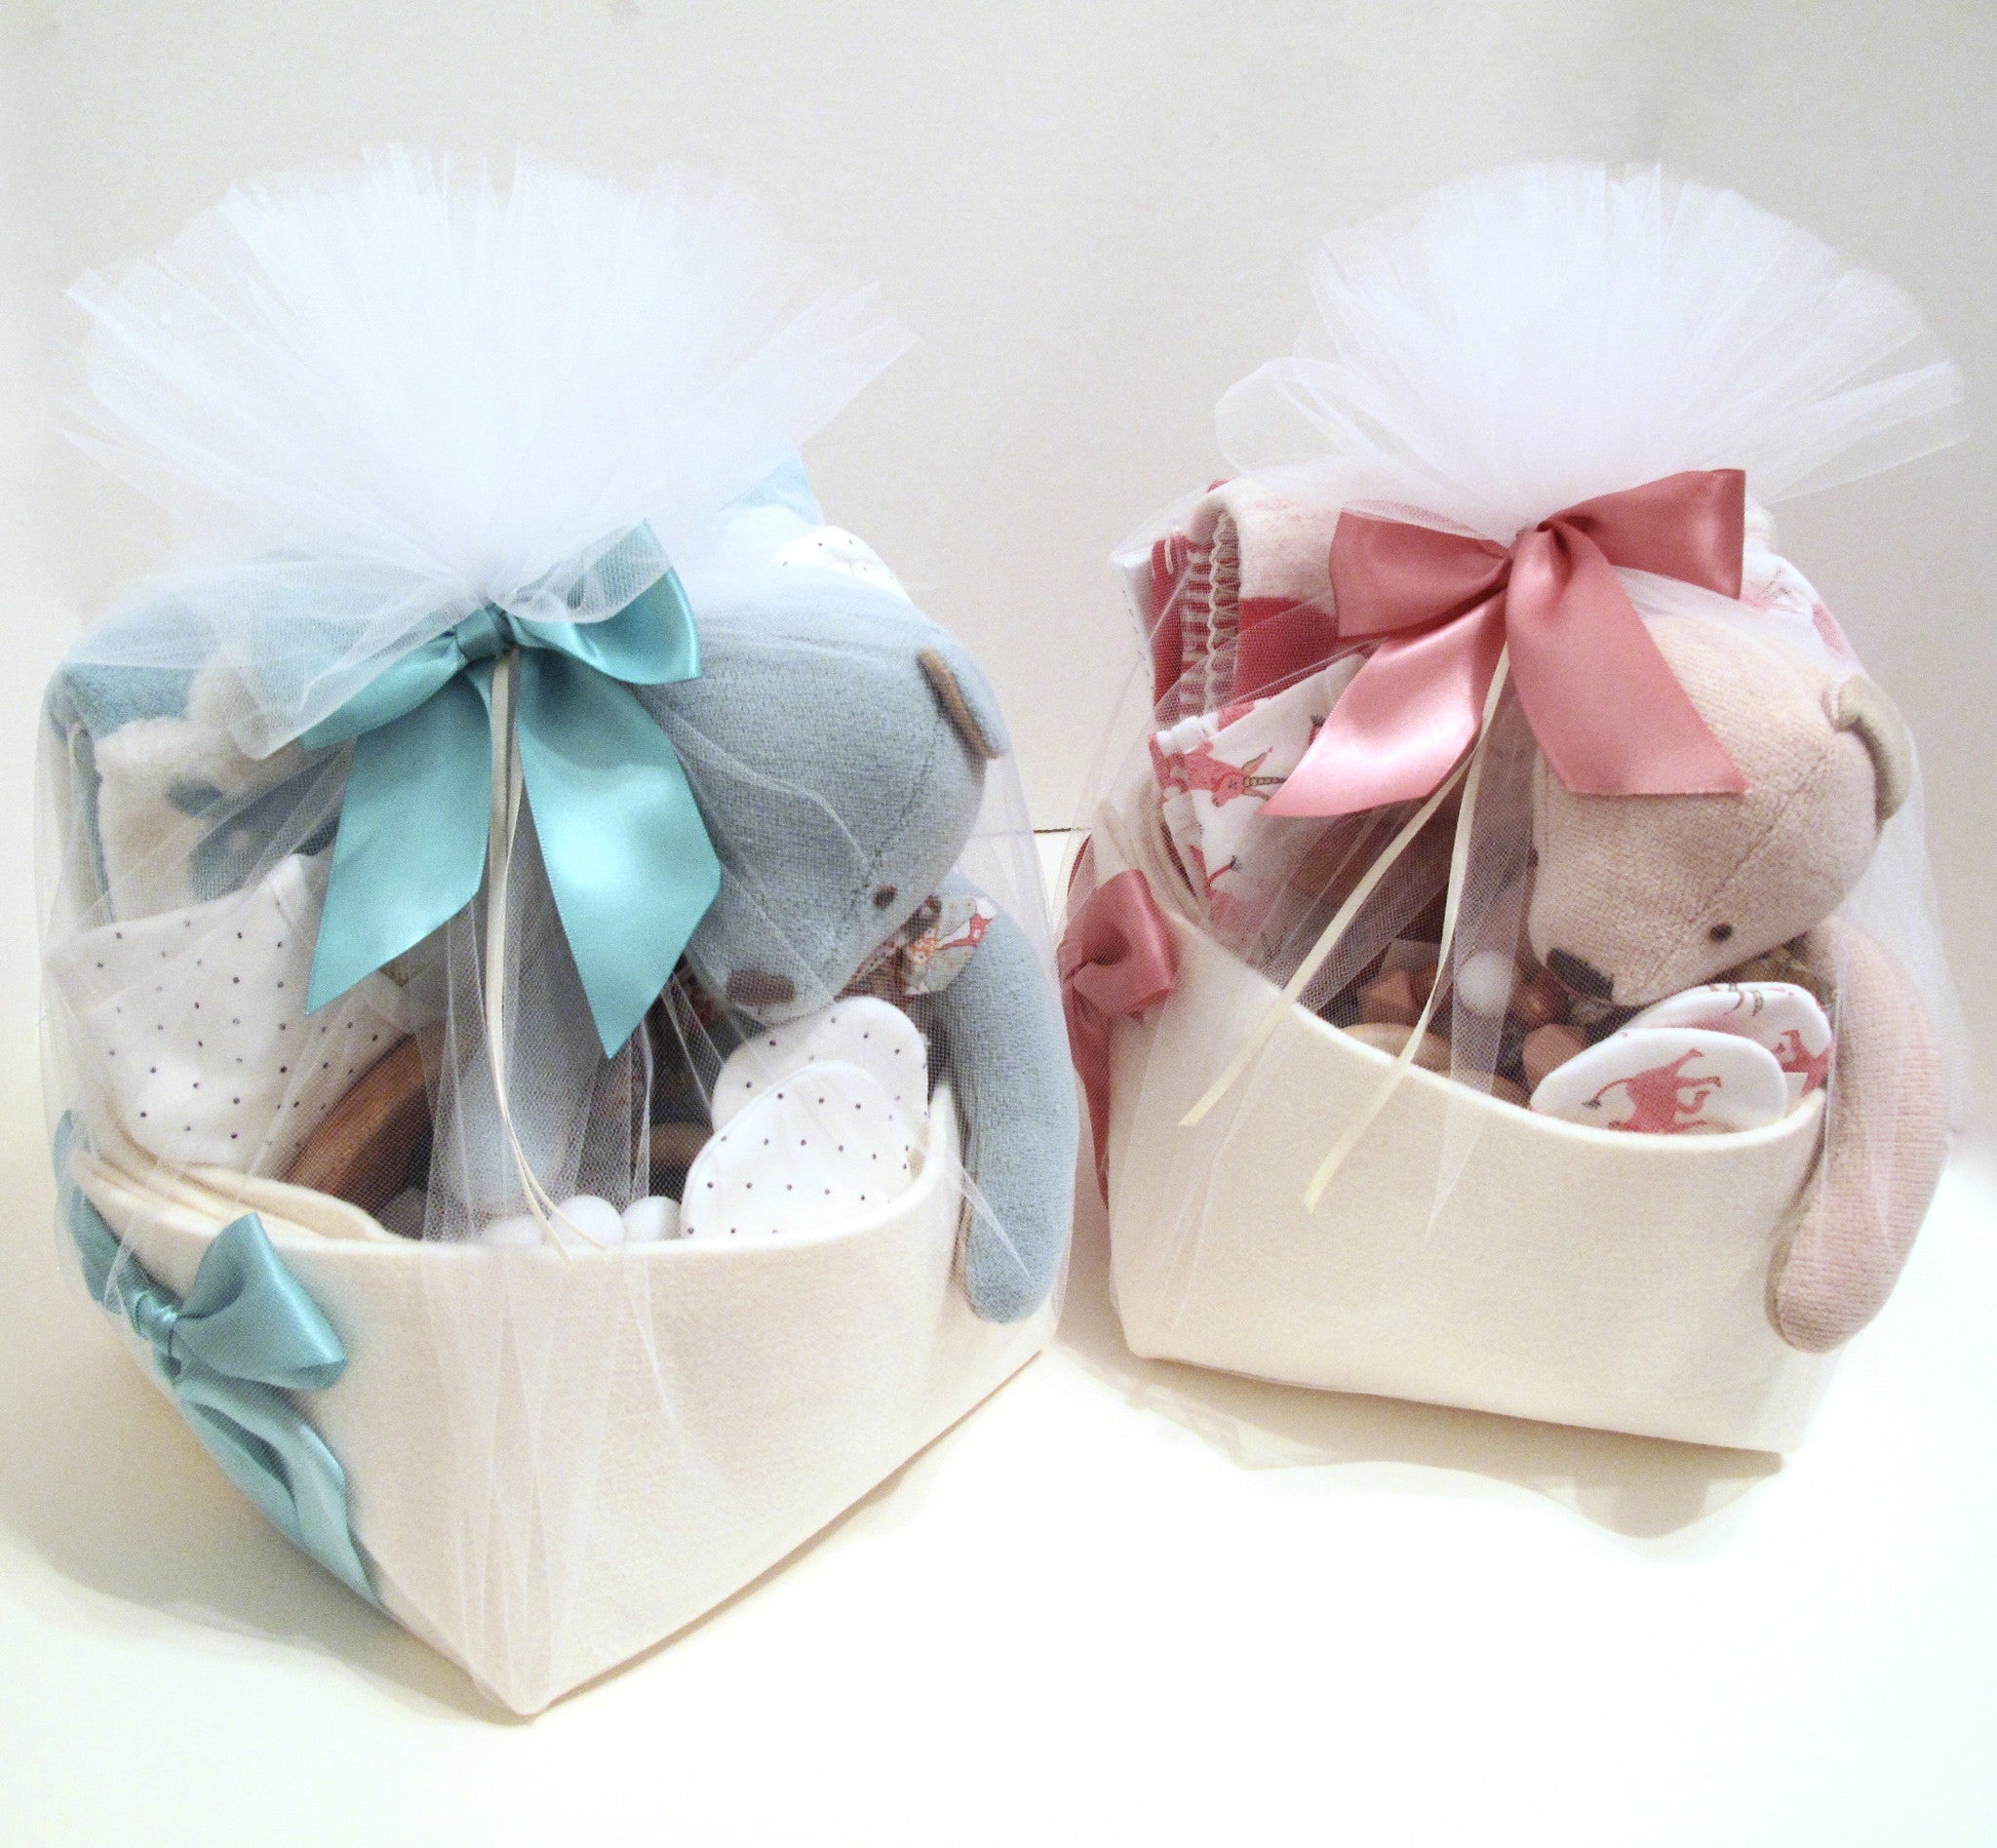 Luxury Baby Gift Baskets for twins by Bonjour Baby Baskets 